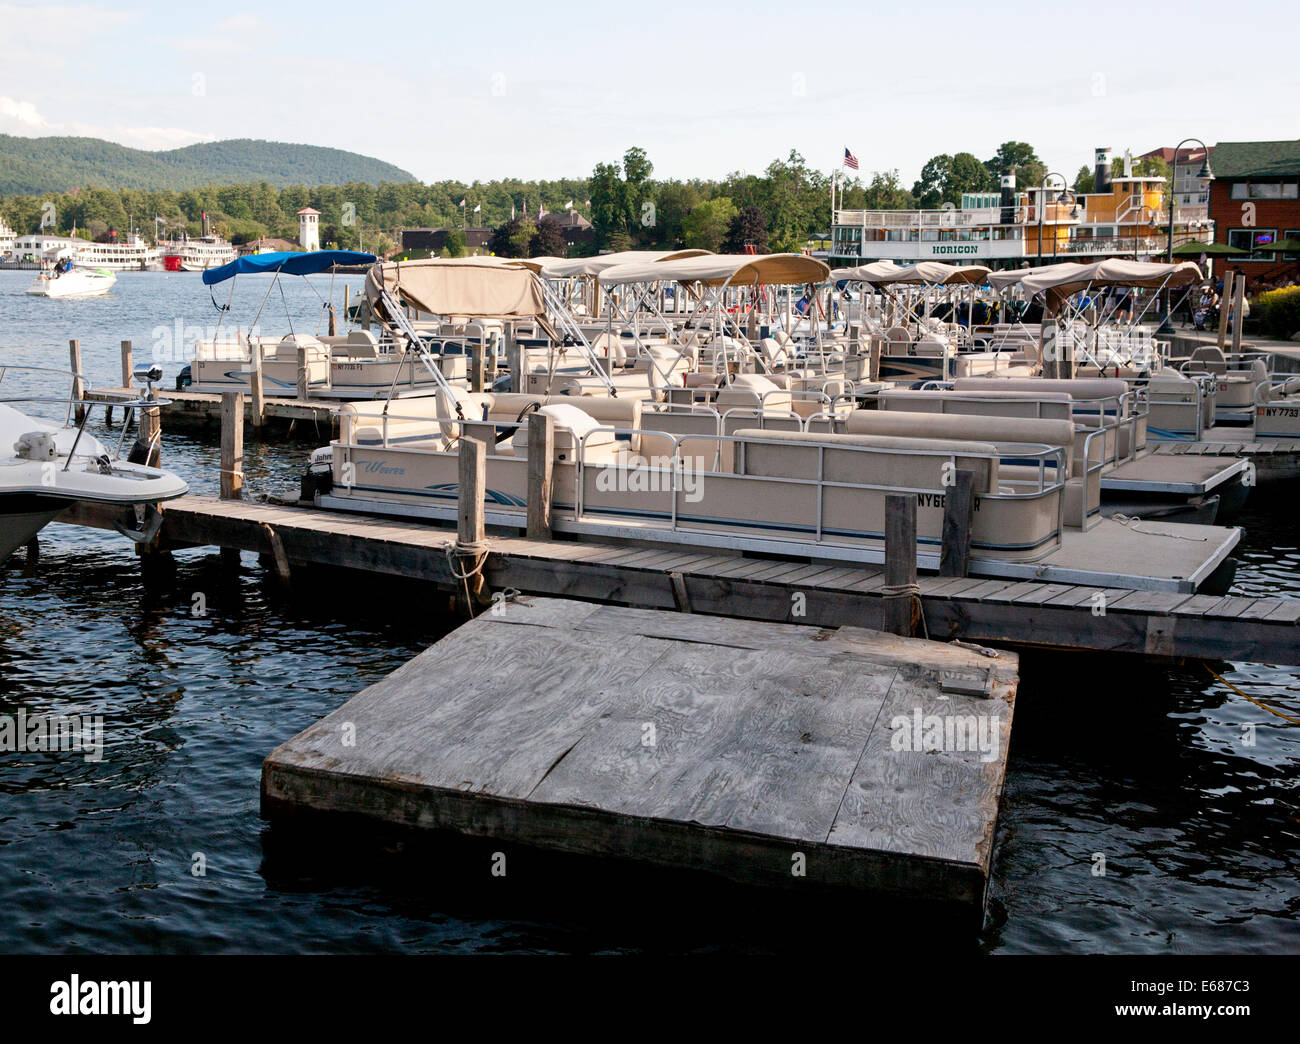 Docks and boats parked in Lake George, New York state Adirondack region. Stock Photo